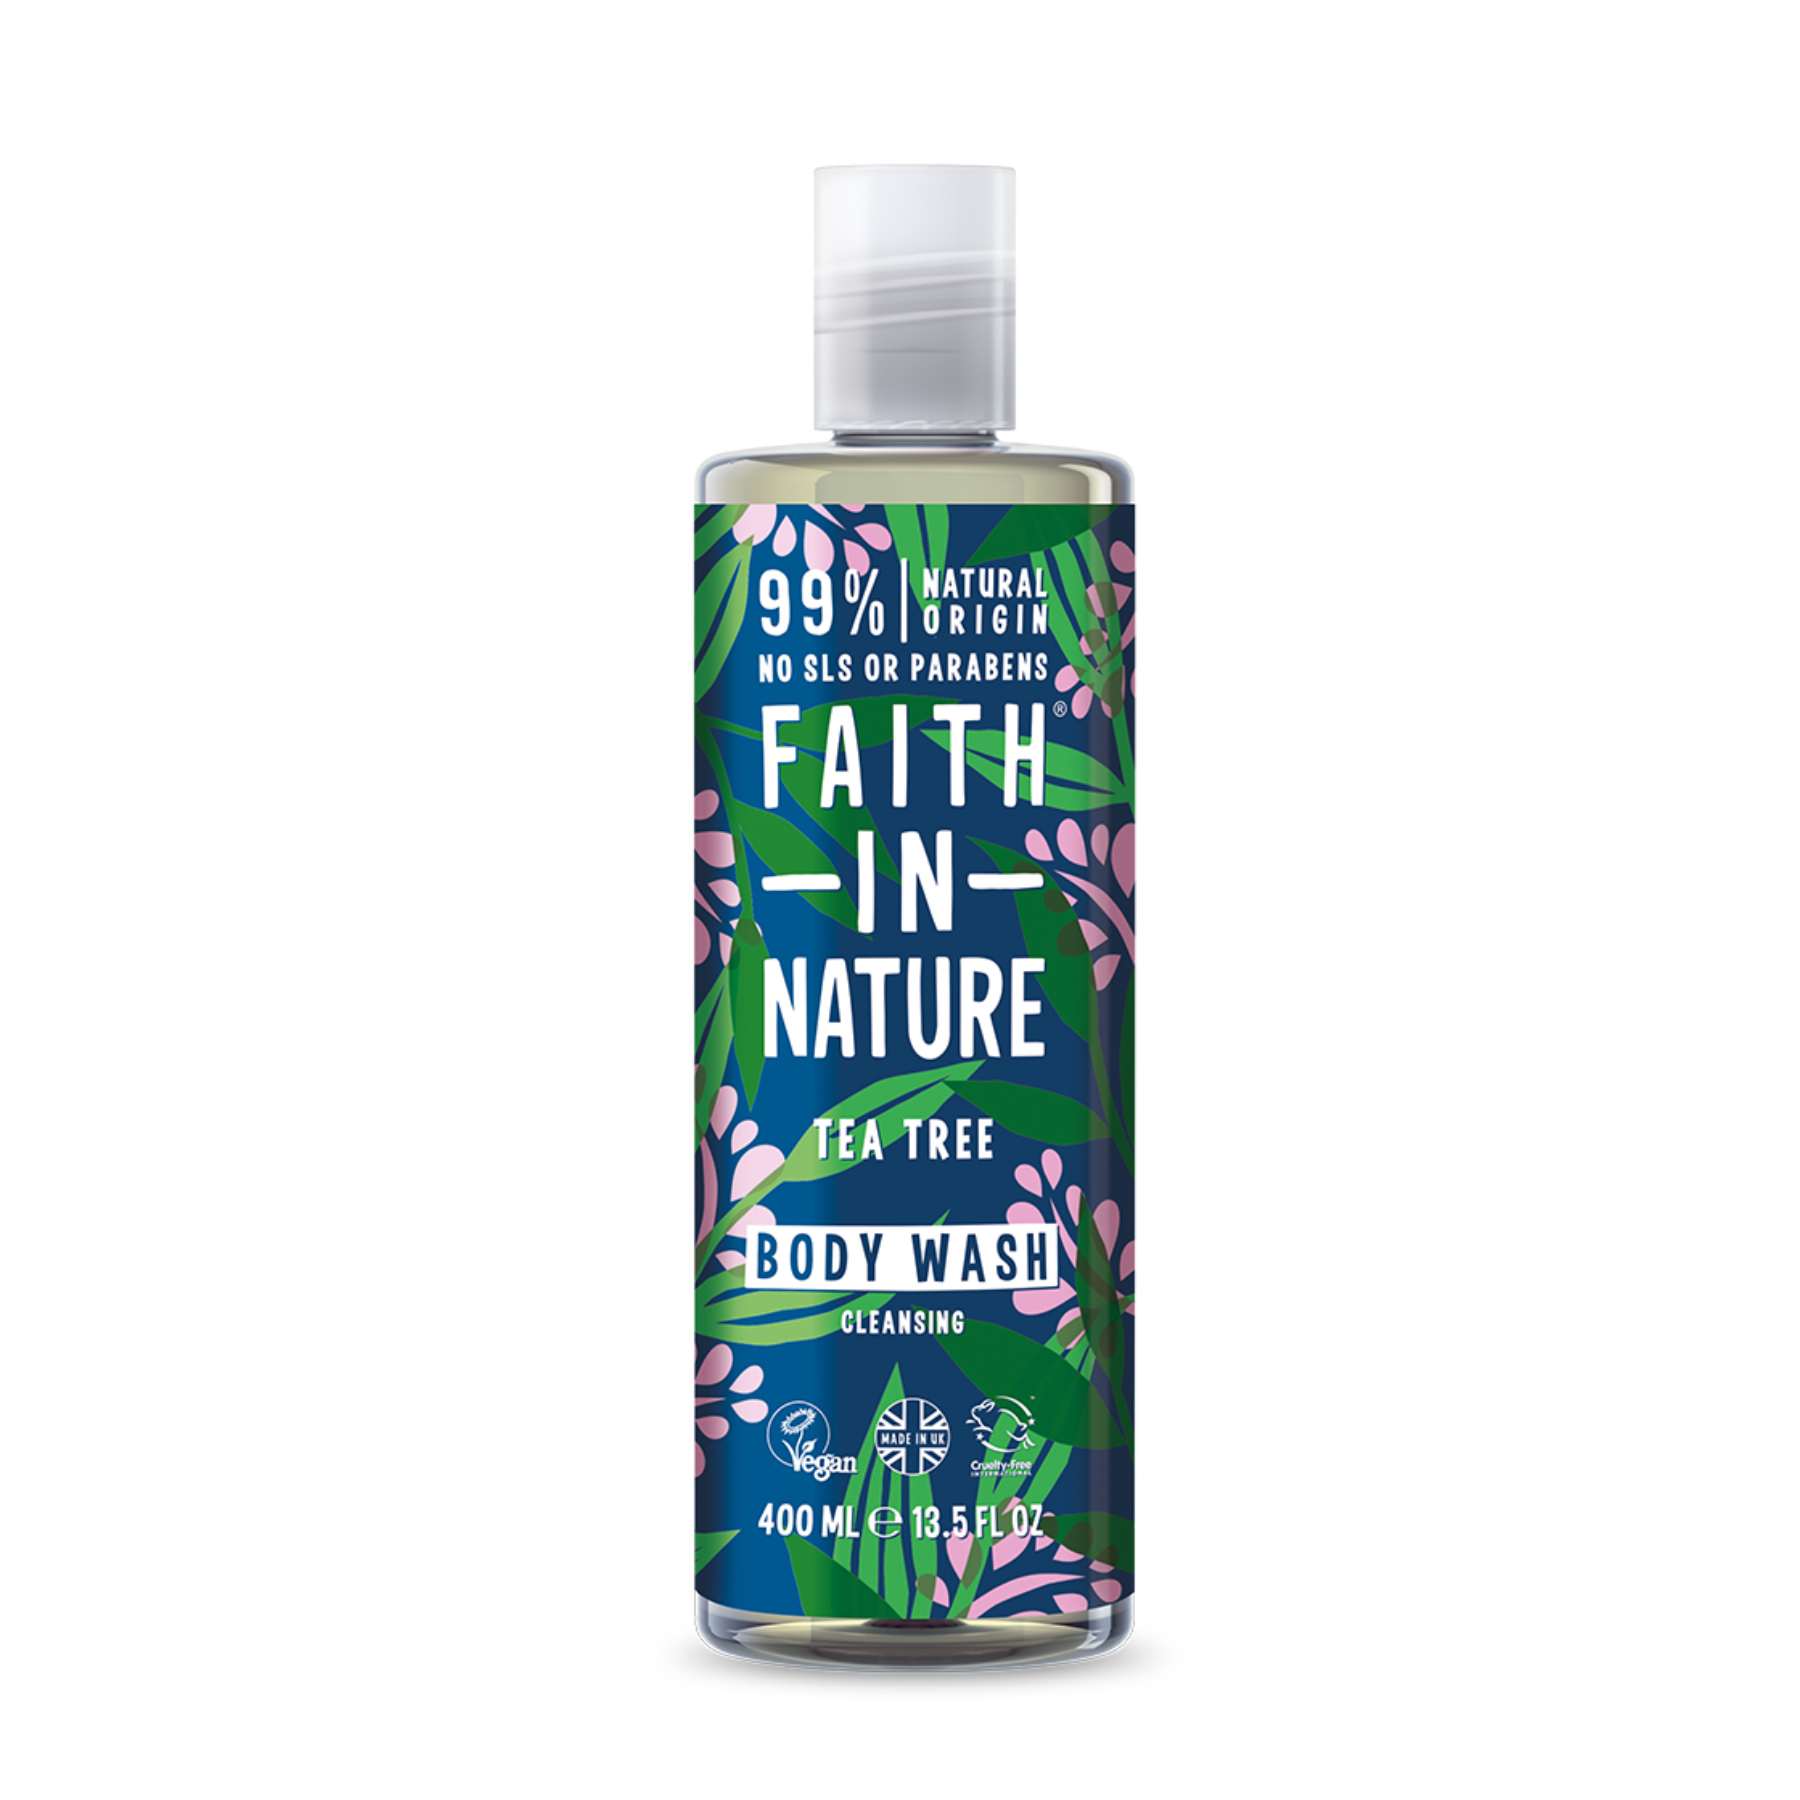 Shop Tea Tree Body Wash from Faith in Nature on SublimeLife.in. Best for leaving your skin feeling fresh and great.